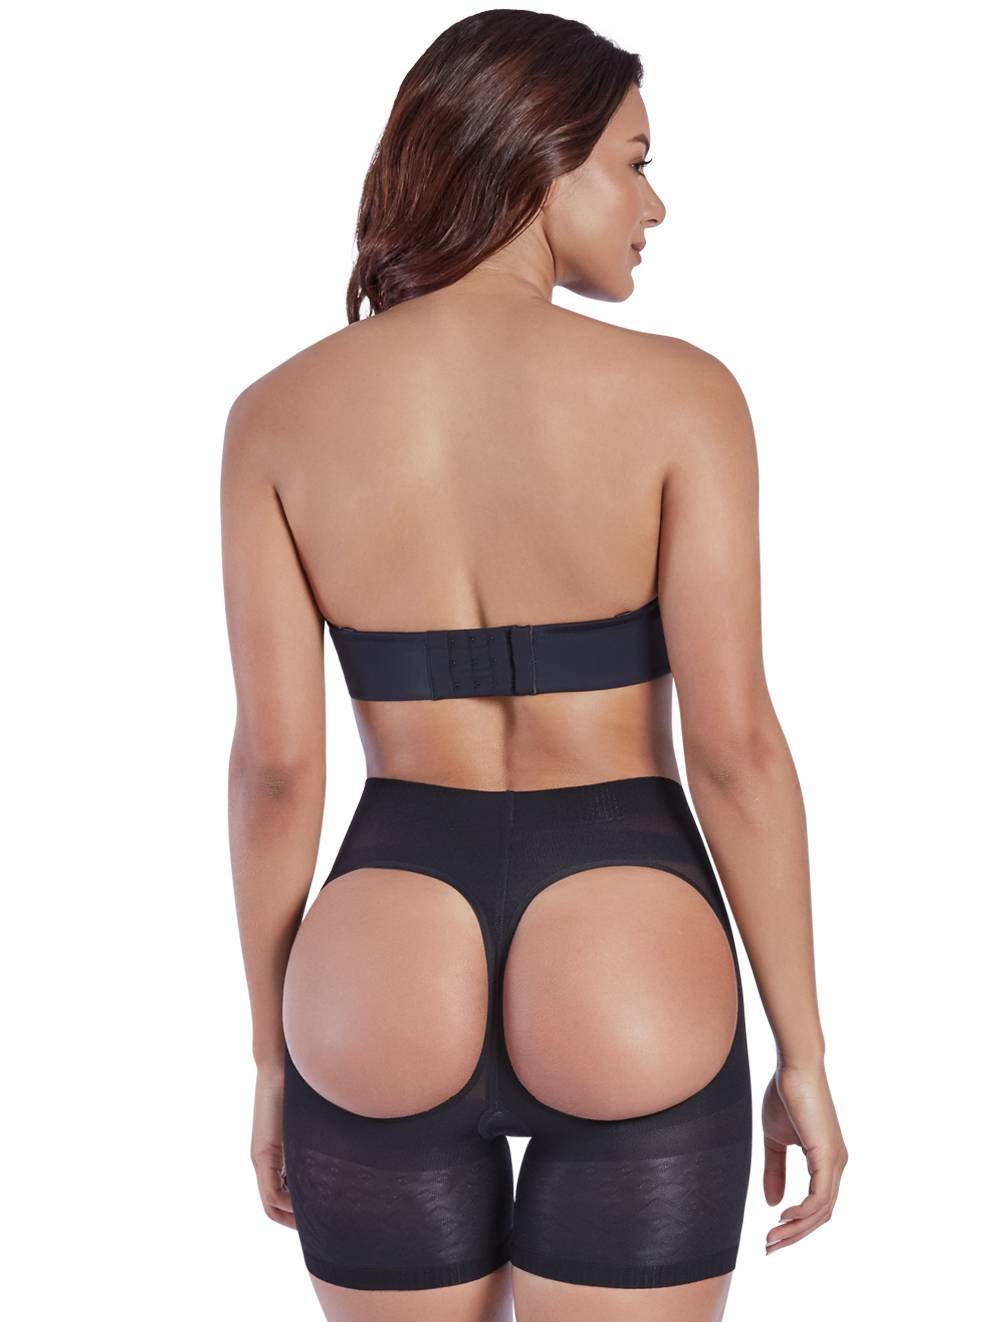 Final Sale Clearance Shaperlove Special Butt Lift Thermal Thigh Slimmer